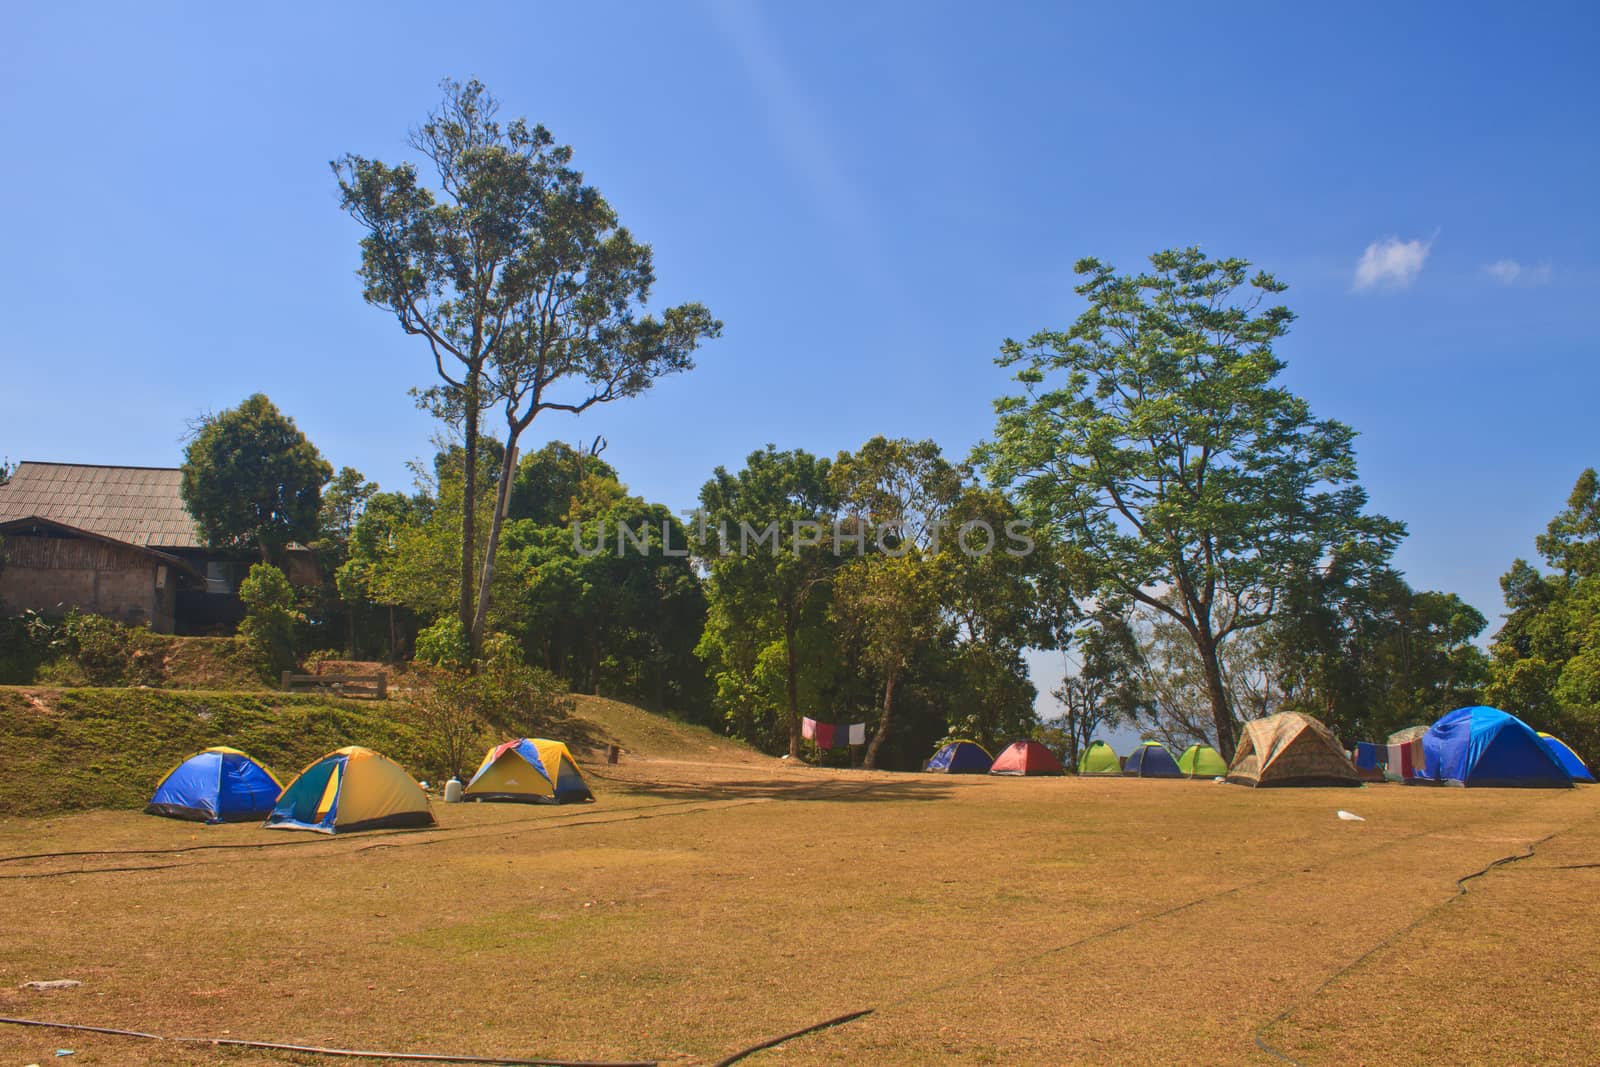 Colorful tent on the camping ground of national park